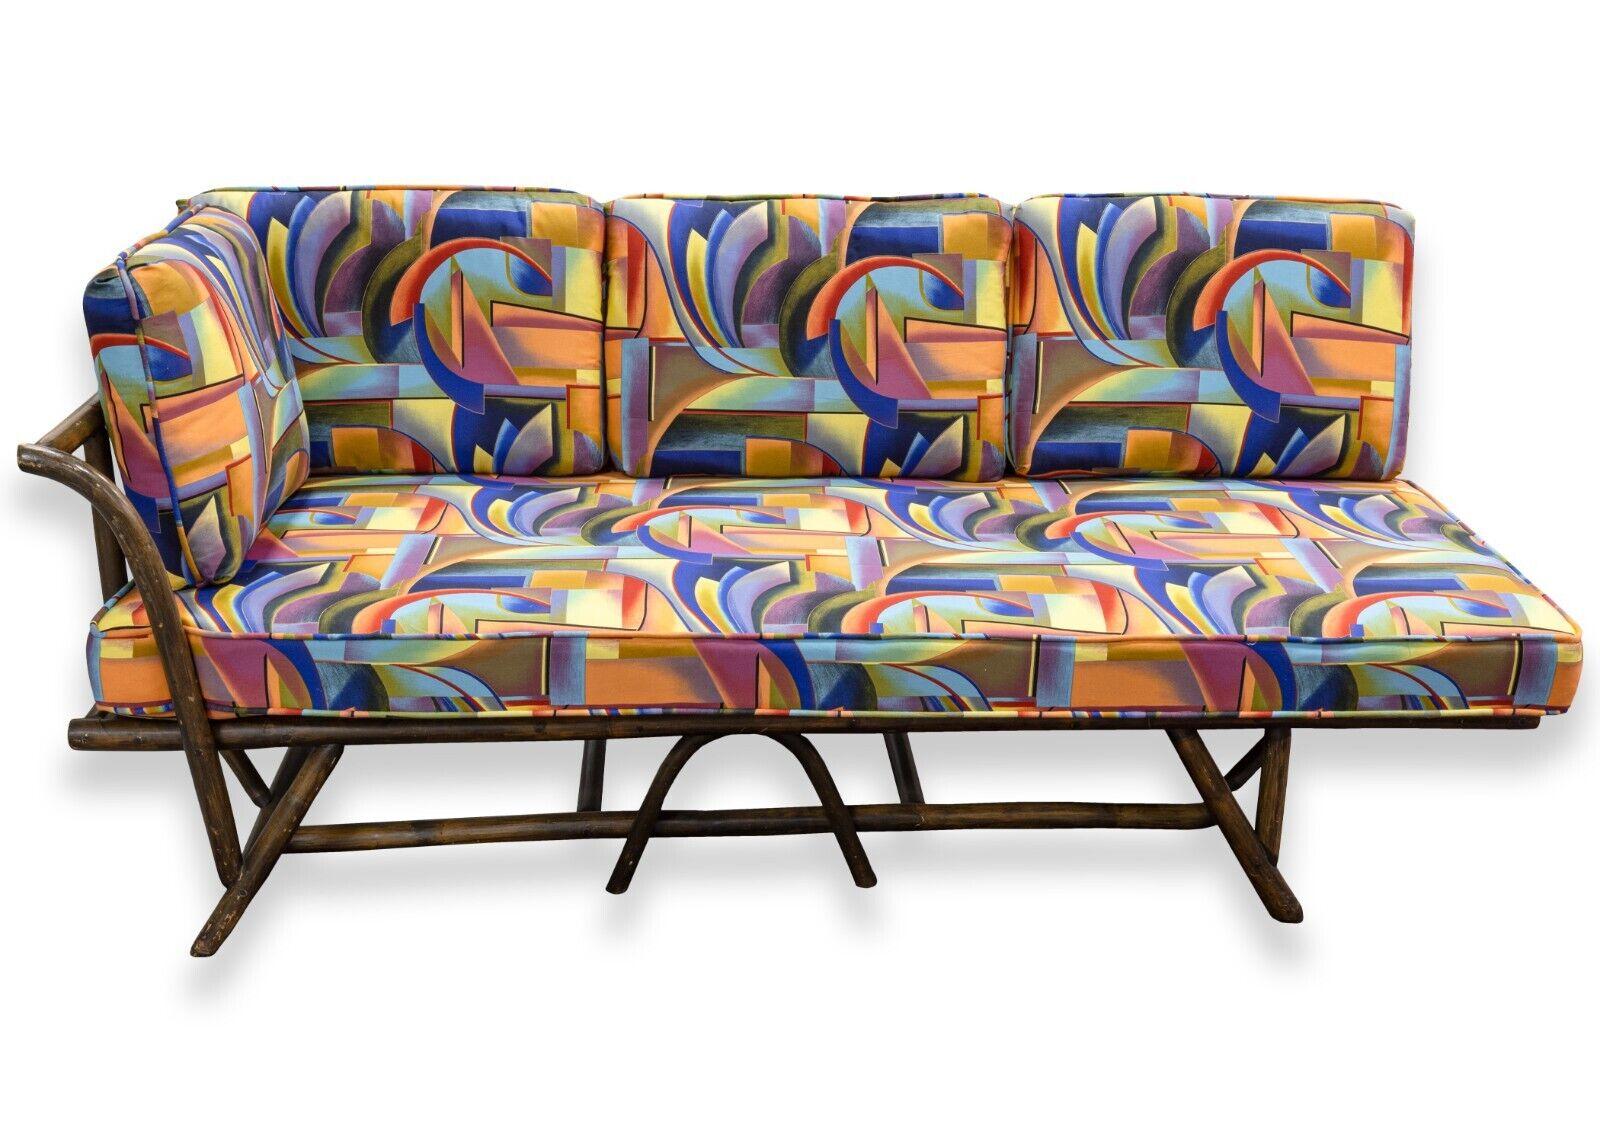 A pair of Ficks Reed bamboo chaise sofas with a funky 90's fabric. This very eclectic pair of chaise sofas are from furniture manufacturer Ficks Reed. The bamboo bases of these chaises are original, but the upholstered fabric is most likely custom